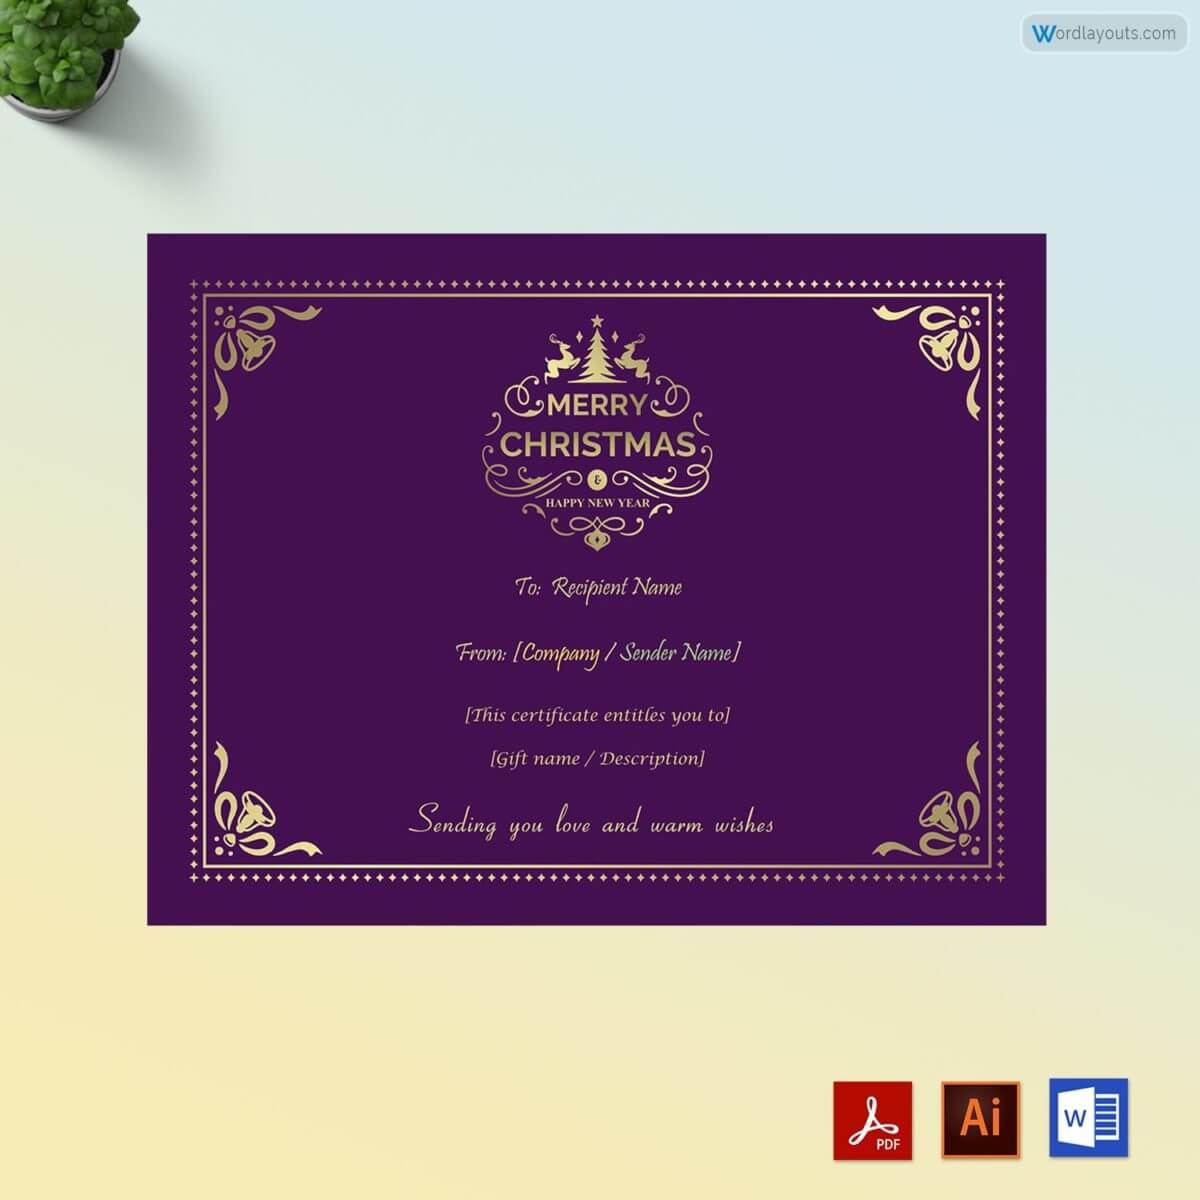 Free Downloadable Christmas Gift Certificate Template 13 for Word, Adobe and AI Format